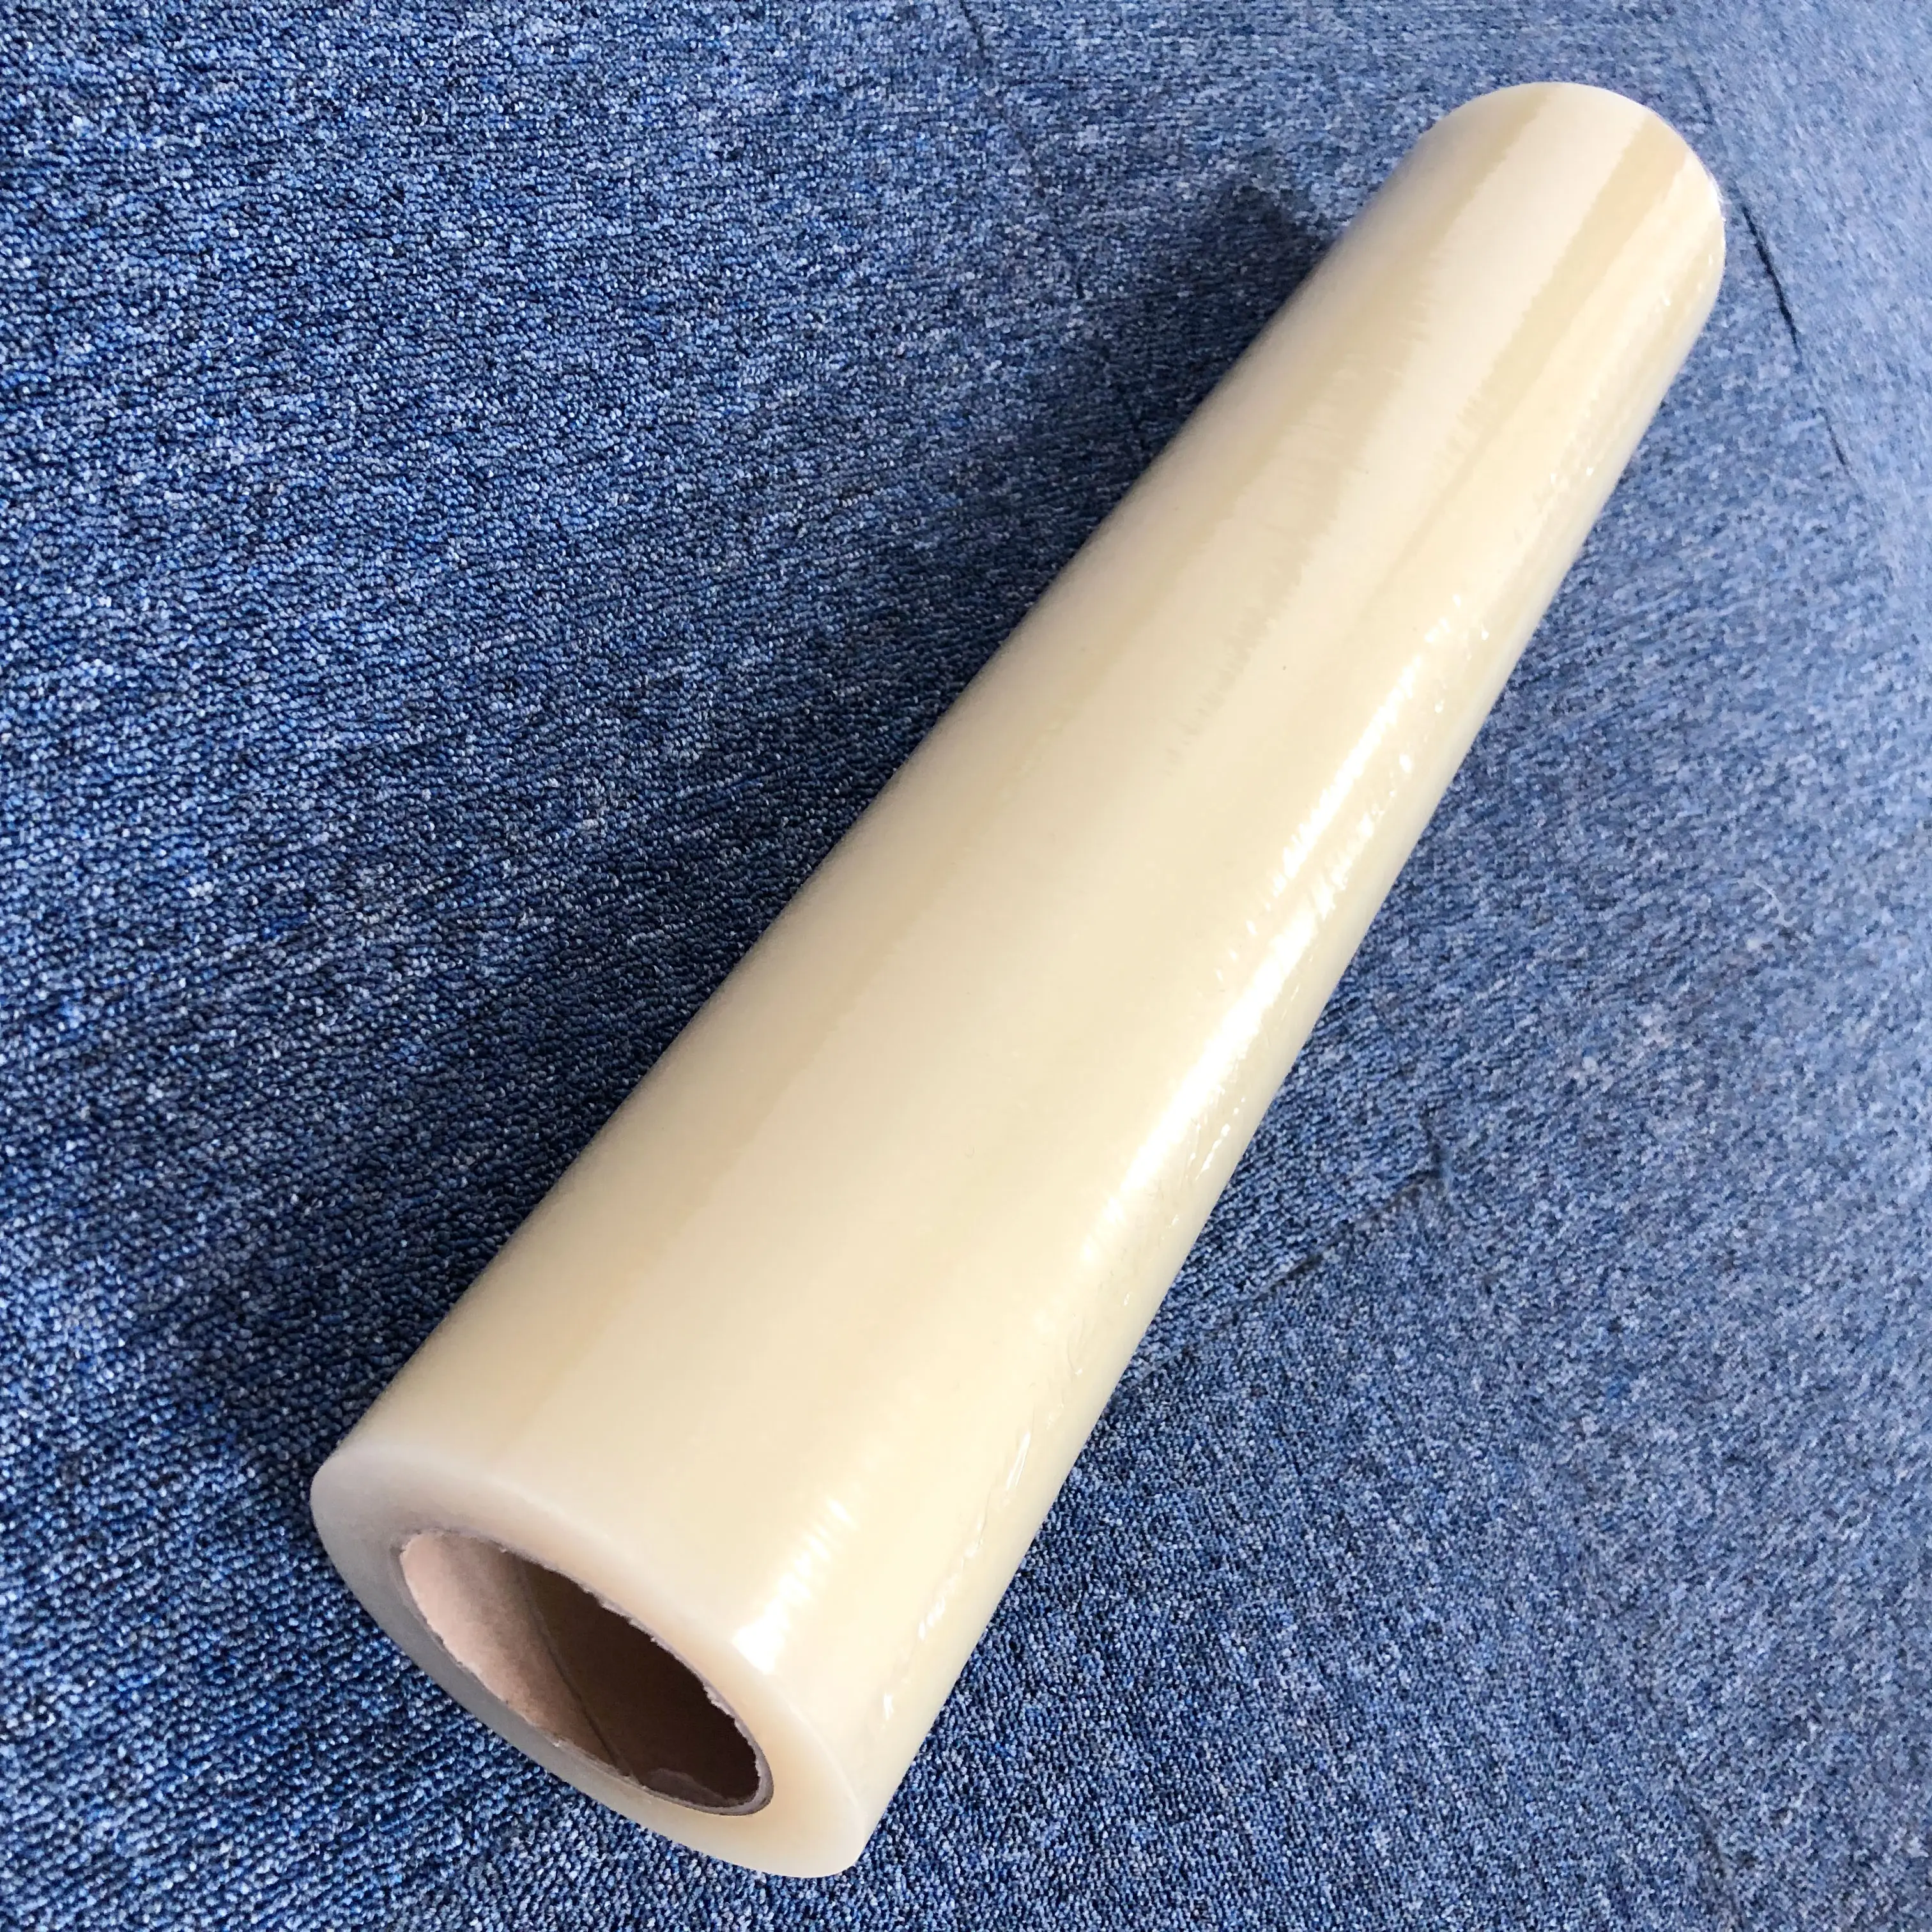 60 mic 24 inch * 200 feet transparent PE plastic carpet cover shield floor protector film for painting work